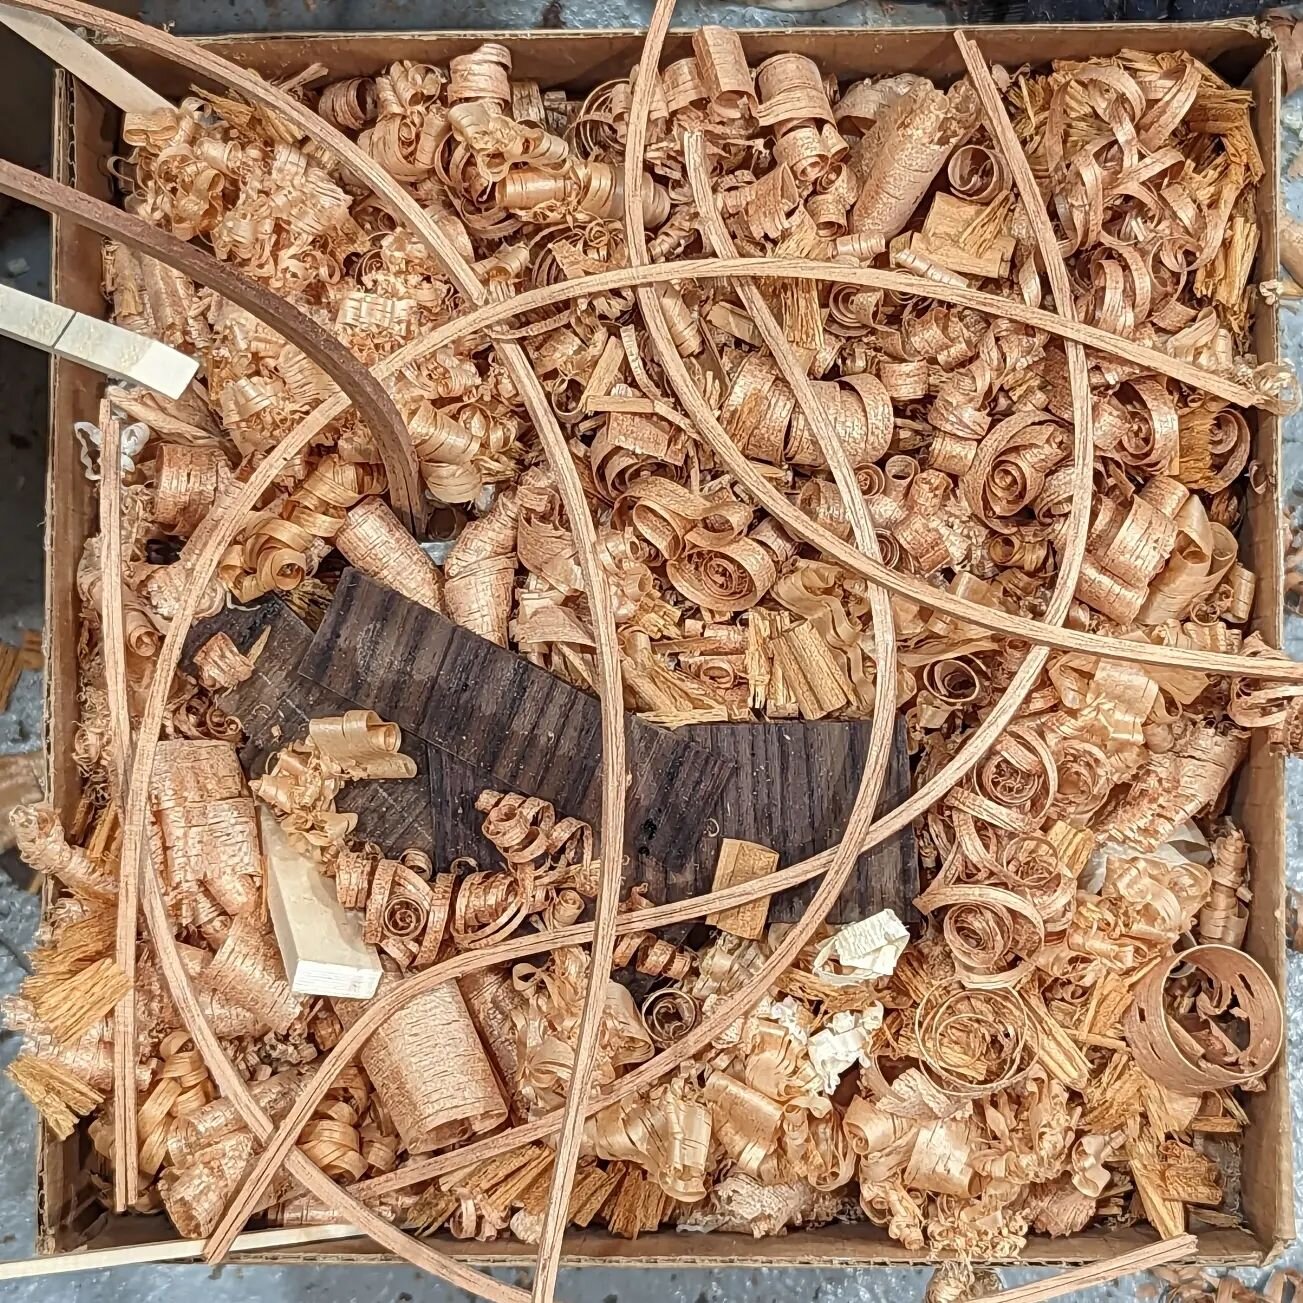 The &quot;not your guitar box of shavings&quot; and some laminated linings waiting to be shaped and glued in.  I'm trying to take some photos that don't look like every other photo I've posted

#compost #firestarter #boxofwood #guitarmaking #luthier